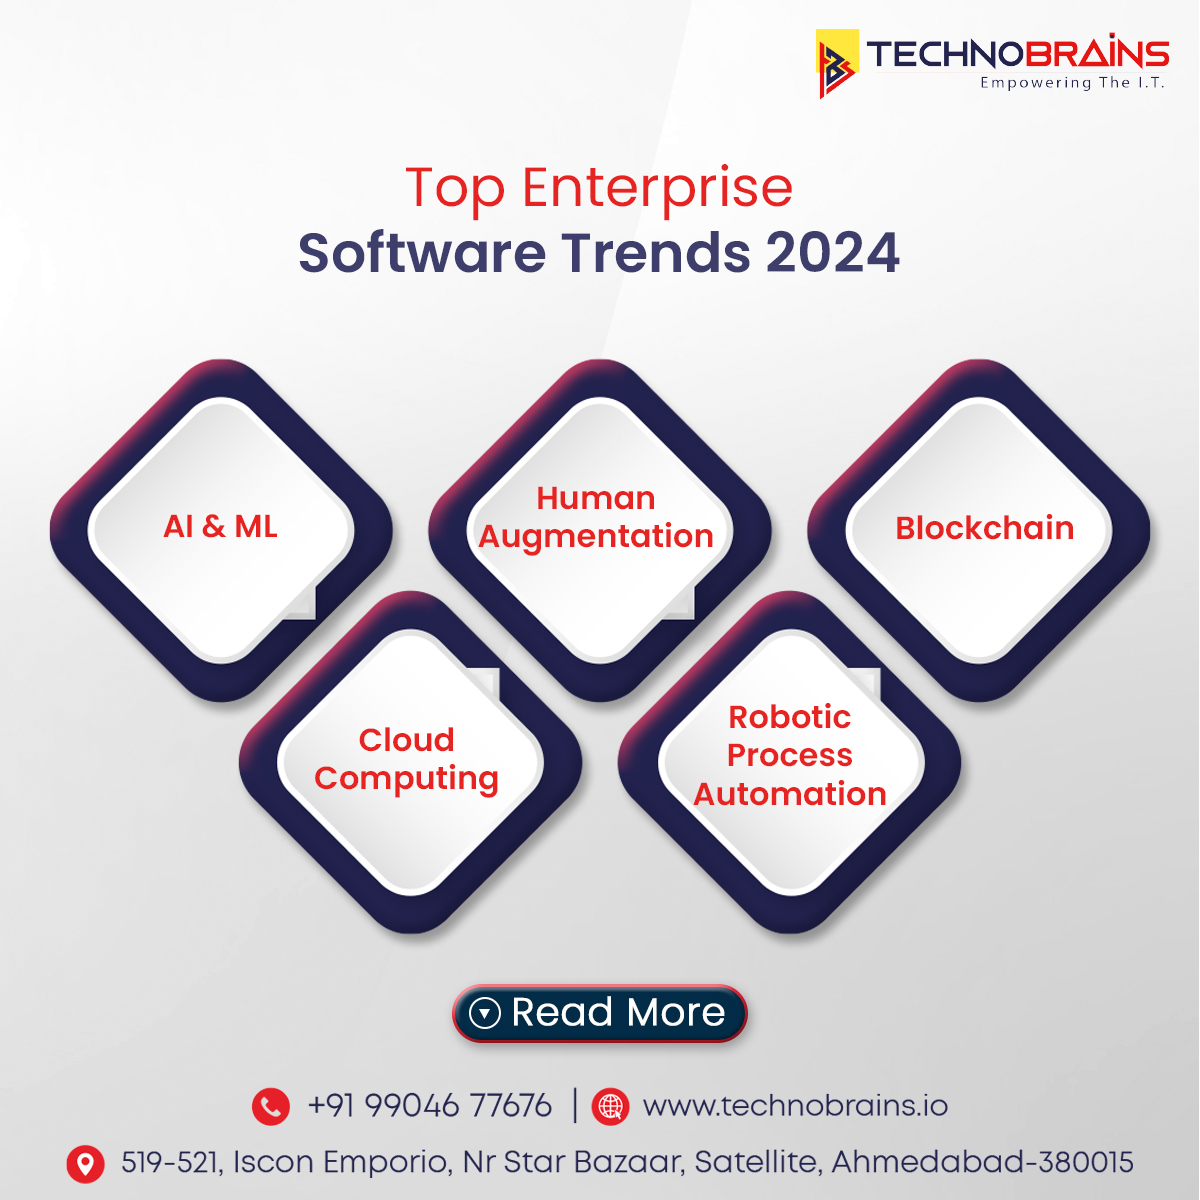 Explore the cutting-edge trends shaping enterprise software in 2024 with insights from TechnoBrains Business Solutions.

Read more at the link below.
technobrains.io/enterprise-sof…

#softwaredevelopment #softwaretrends #enterprisesoftwaretrends #cloudcomputing #humanaugmentation